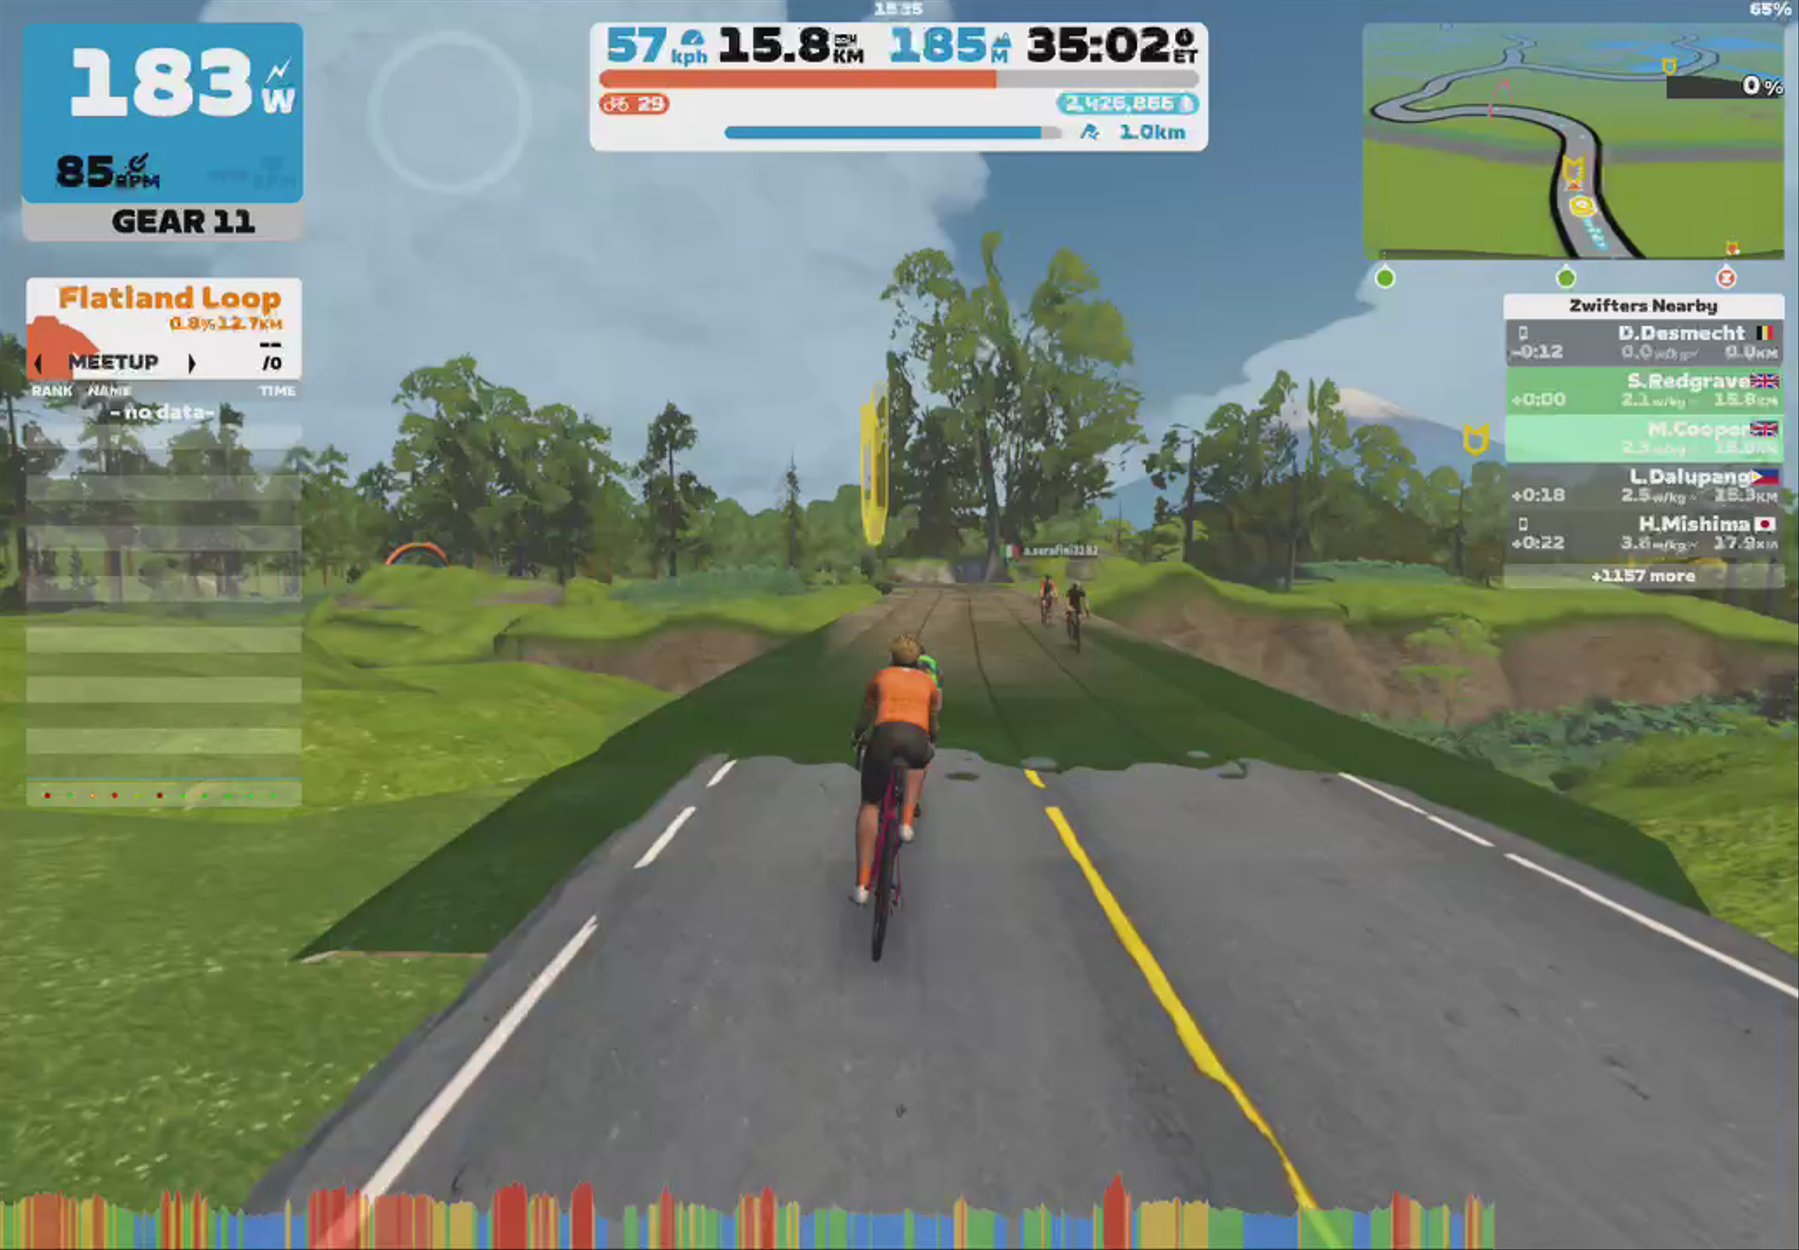 Zwift - Malcolm Cooper's Meetup on Countryside Tour in Makuri Islands